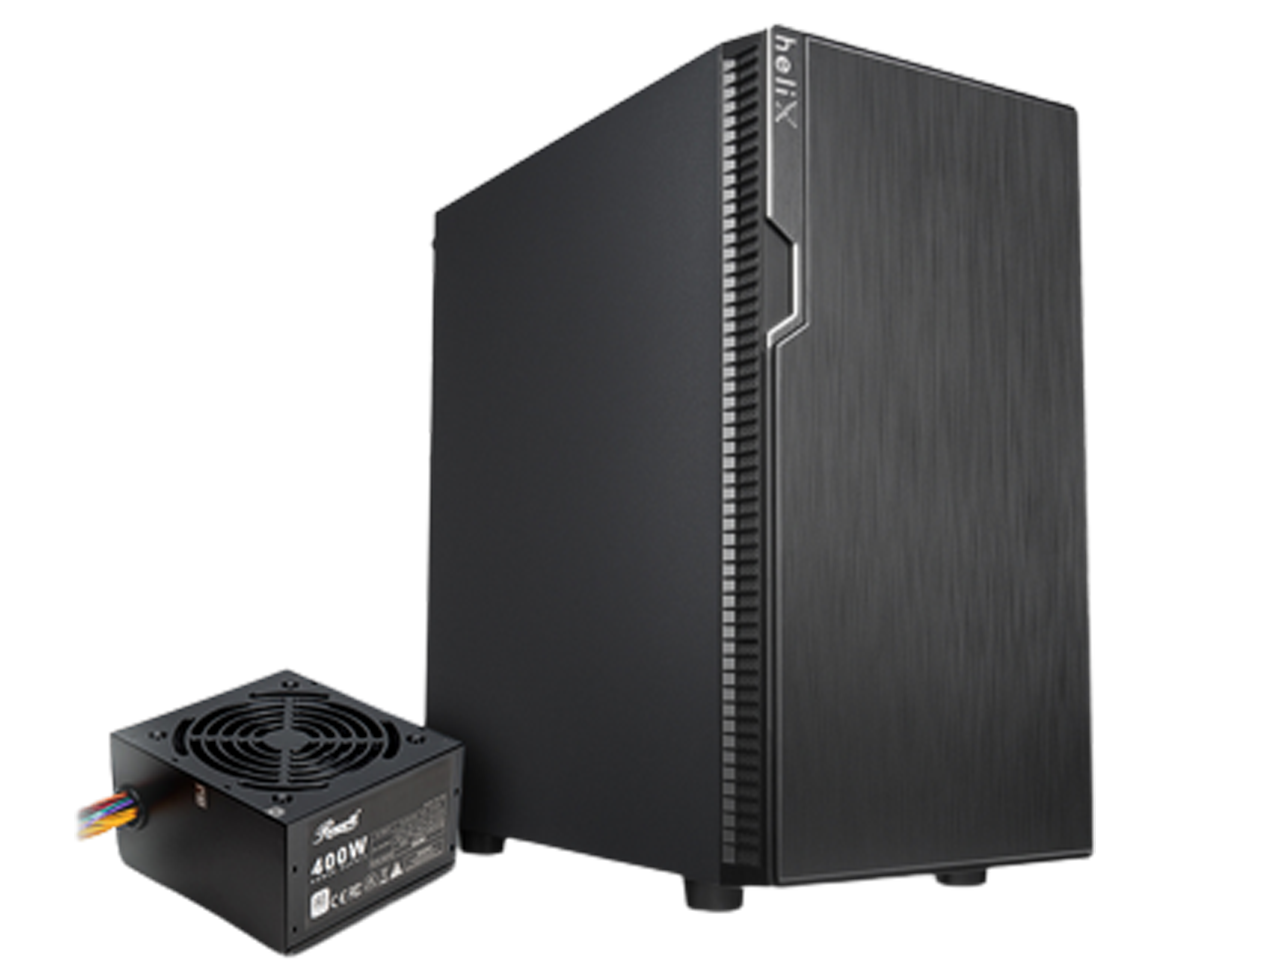 Rosewill FBM-X2-400-HELIX Micro ATX Mini Tower Desktop Computer Case with Pre-Installed 400W PSU